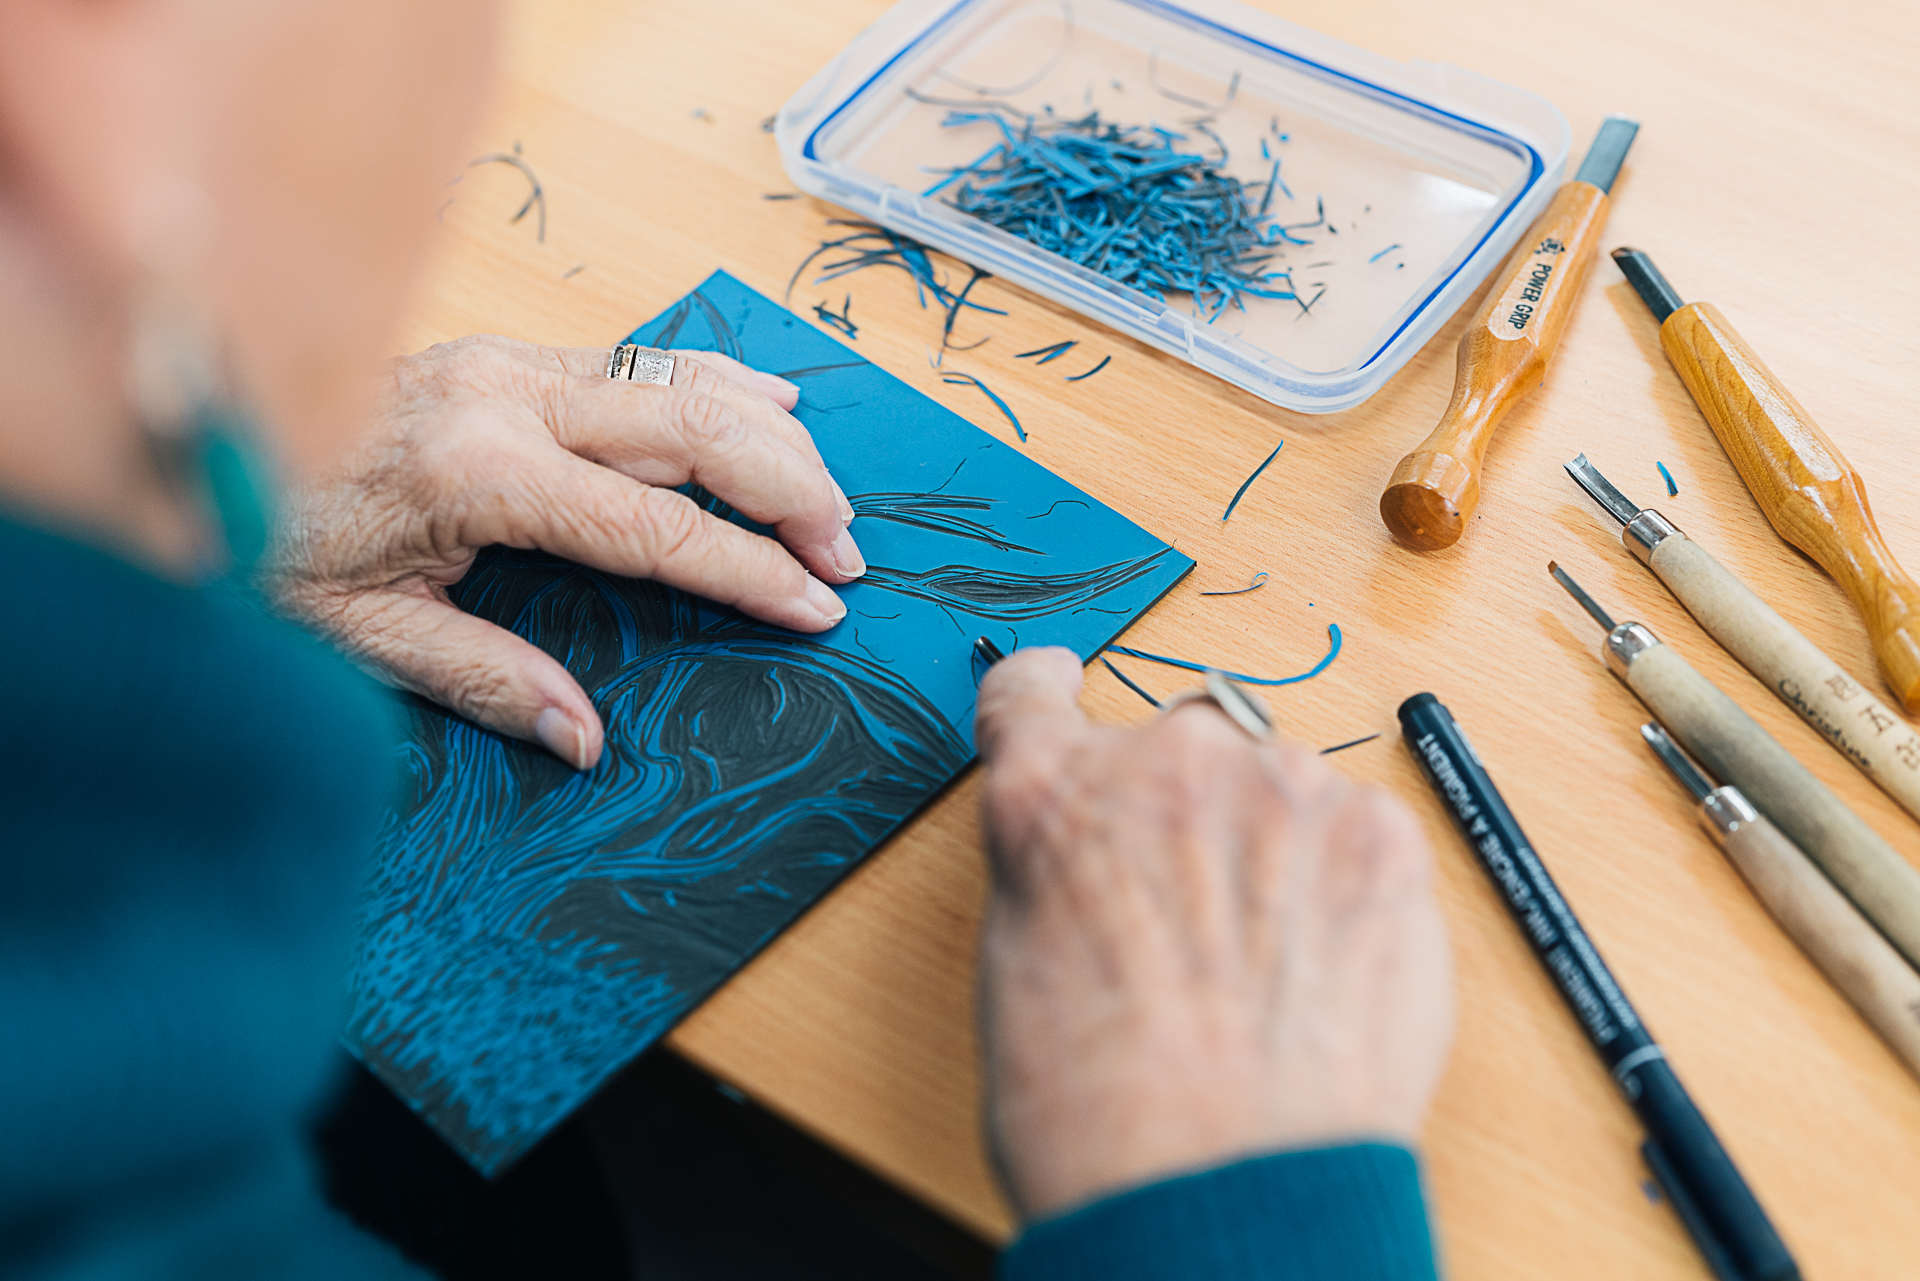 Female person wearing blue jumper carving a lino cut for printmaking using timber handled cutting tools.